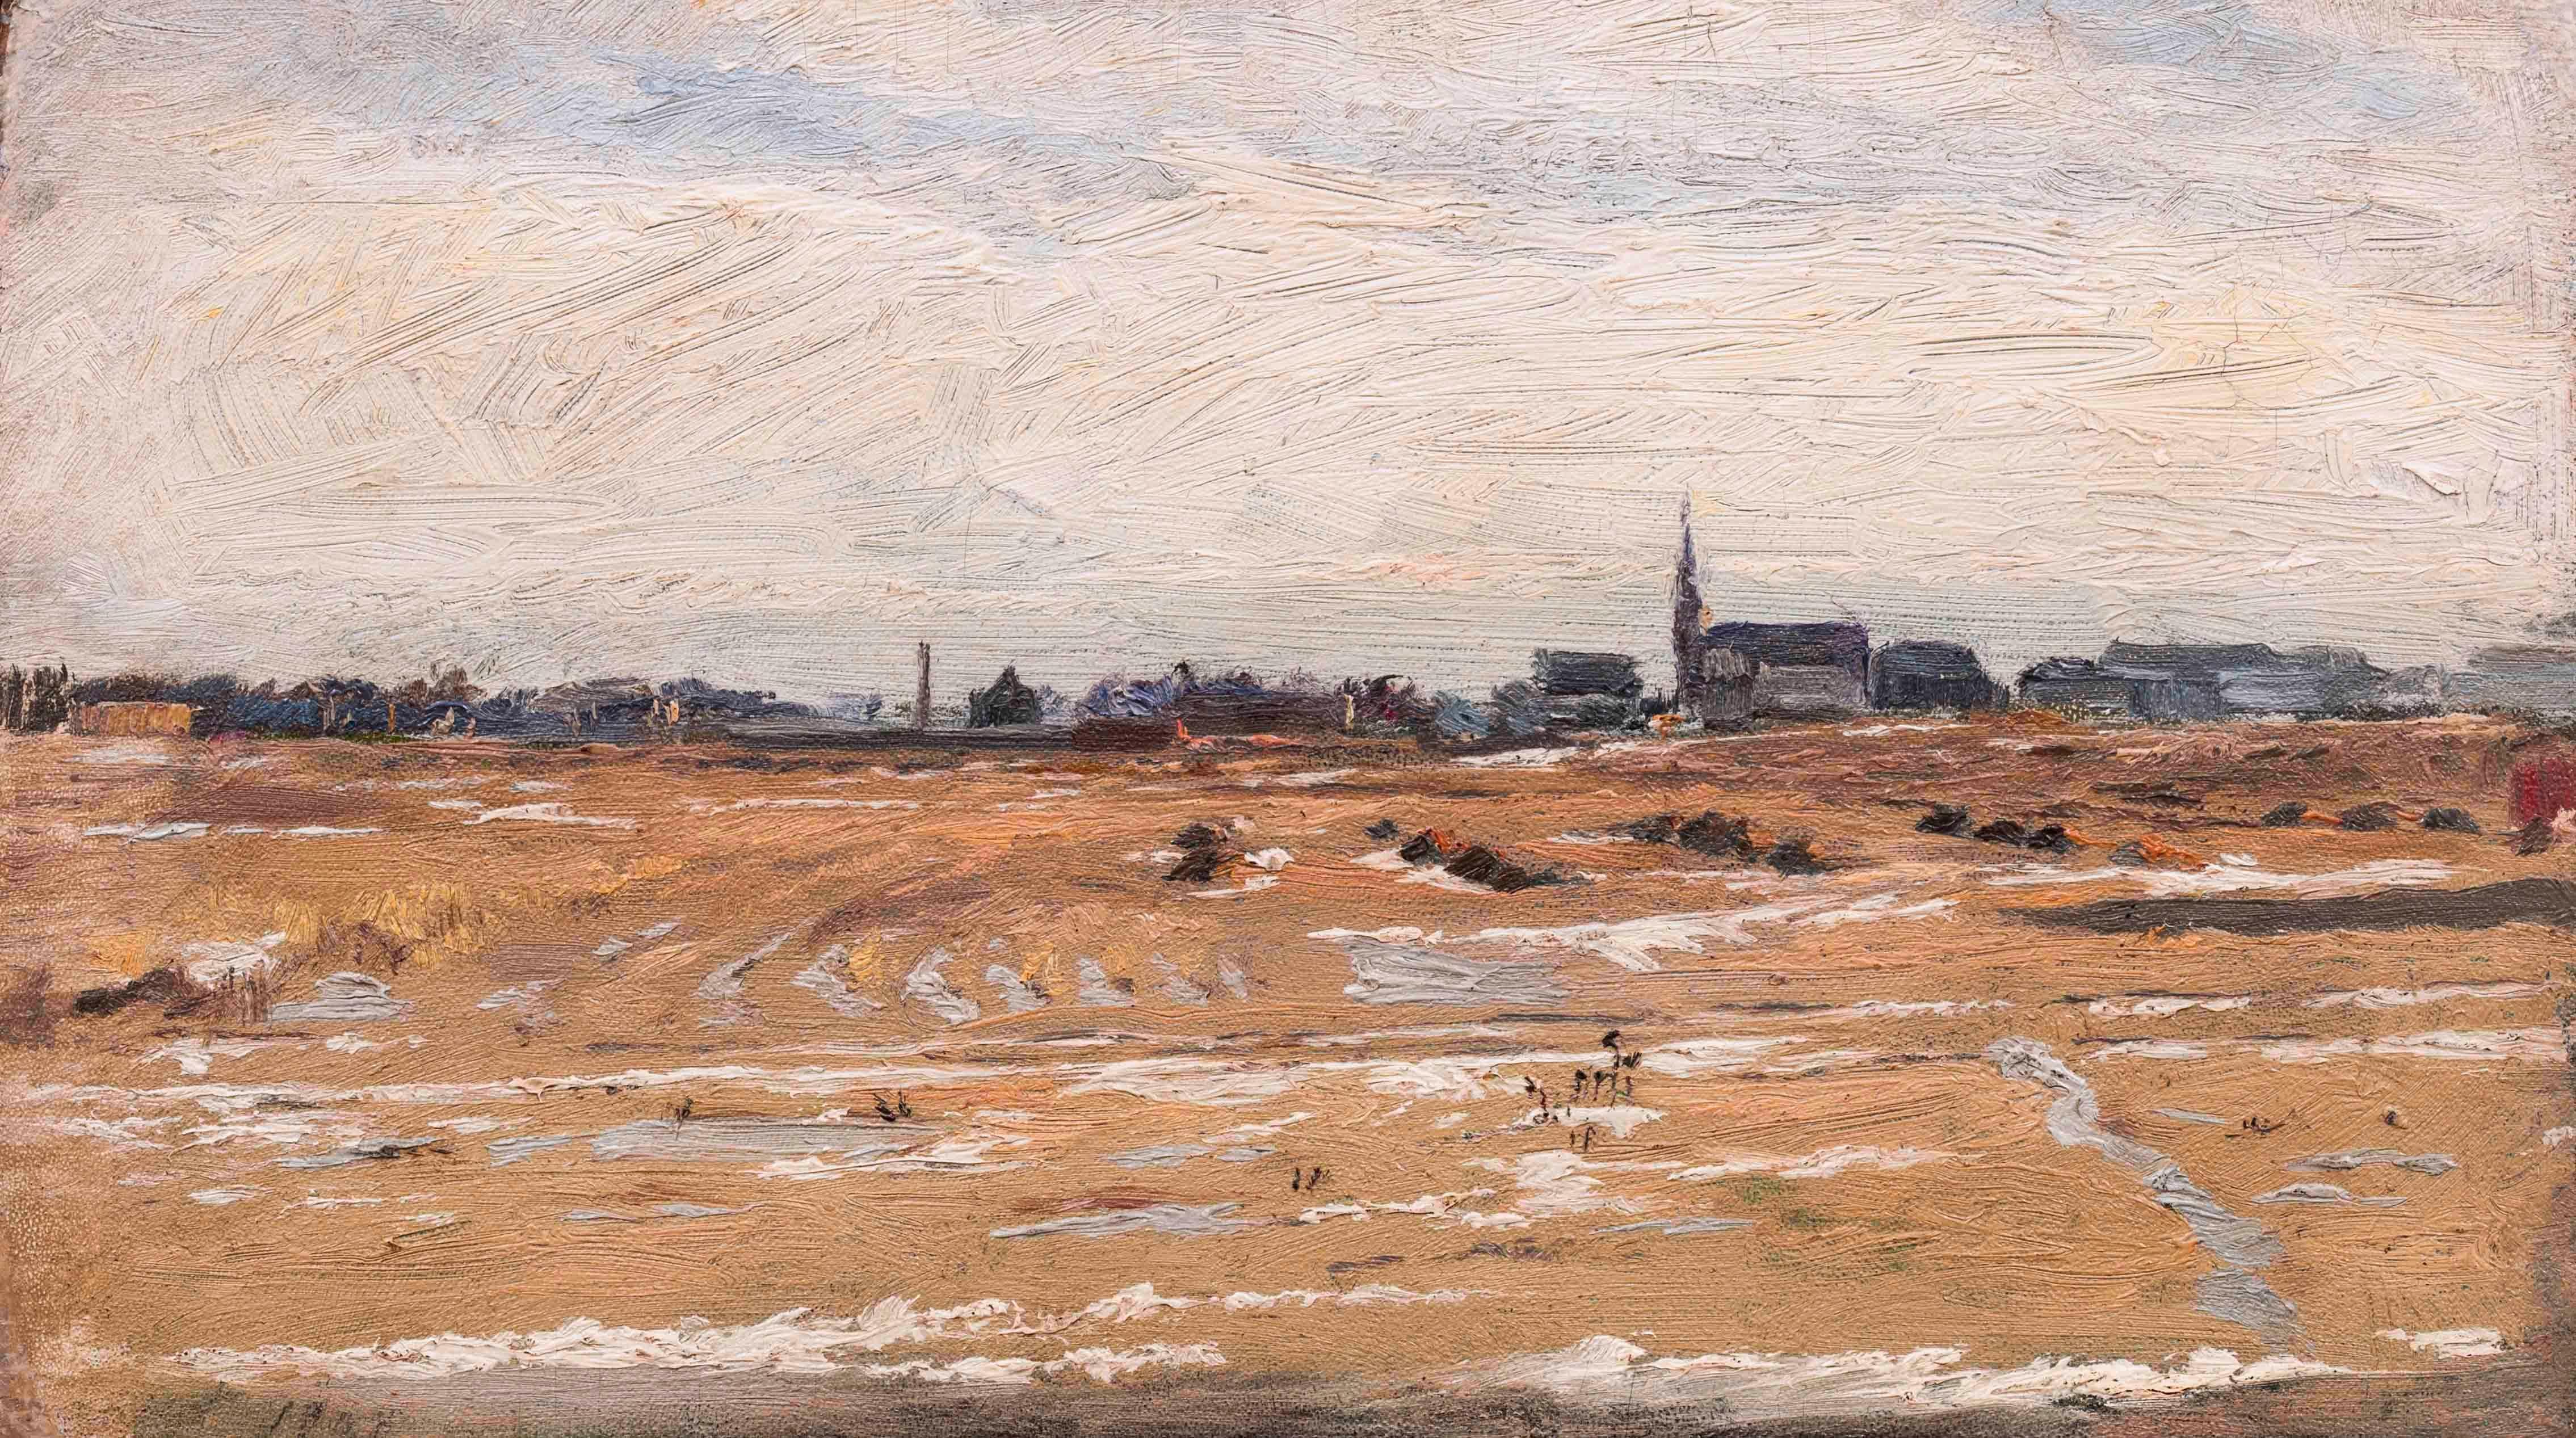 Church at Indian Hill and Rogers Park Looking South by Max Gundlach (1863‒1957, American)

MAX GUNDLACH (1863‒1957)
Church at Indian Hill and Rogers Park Looking South
Oil on board
7 ½ x 13 ¼ inches
Estate of the artist

Affectionately known as